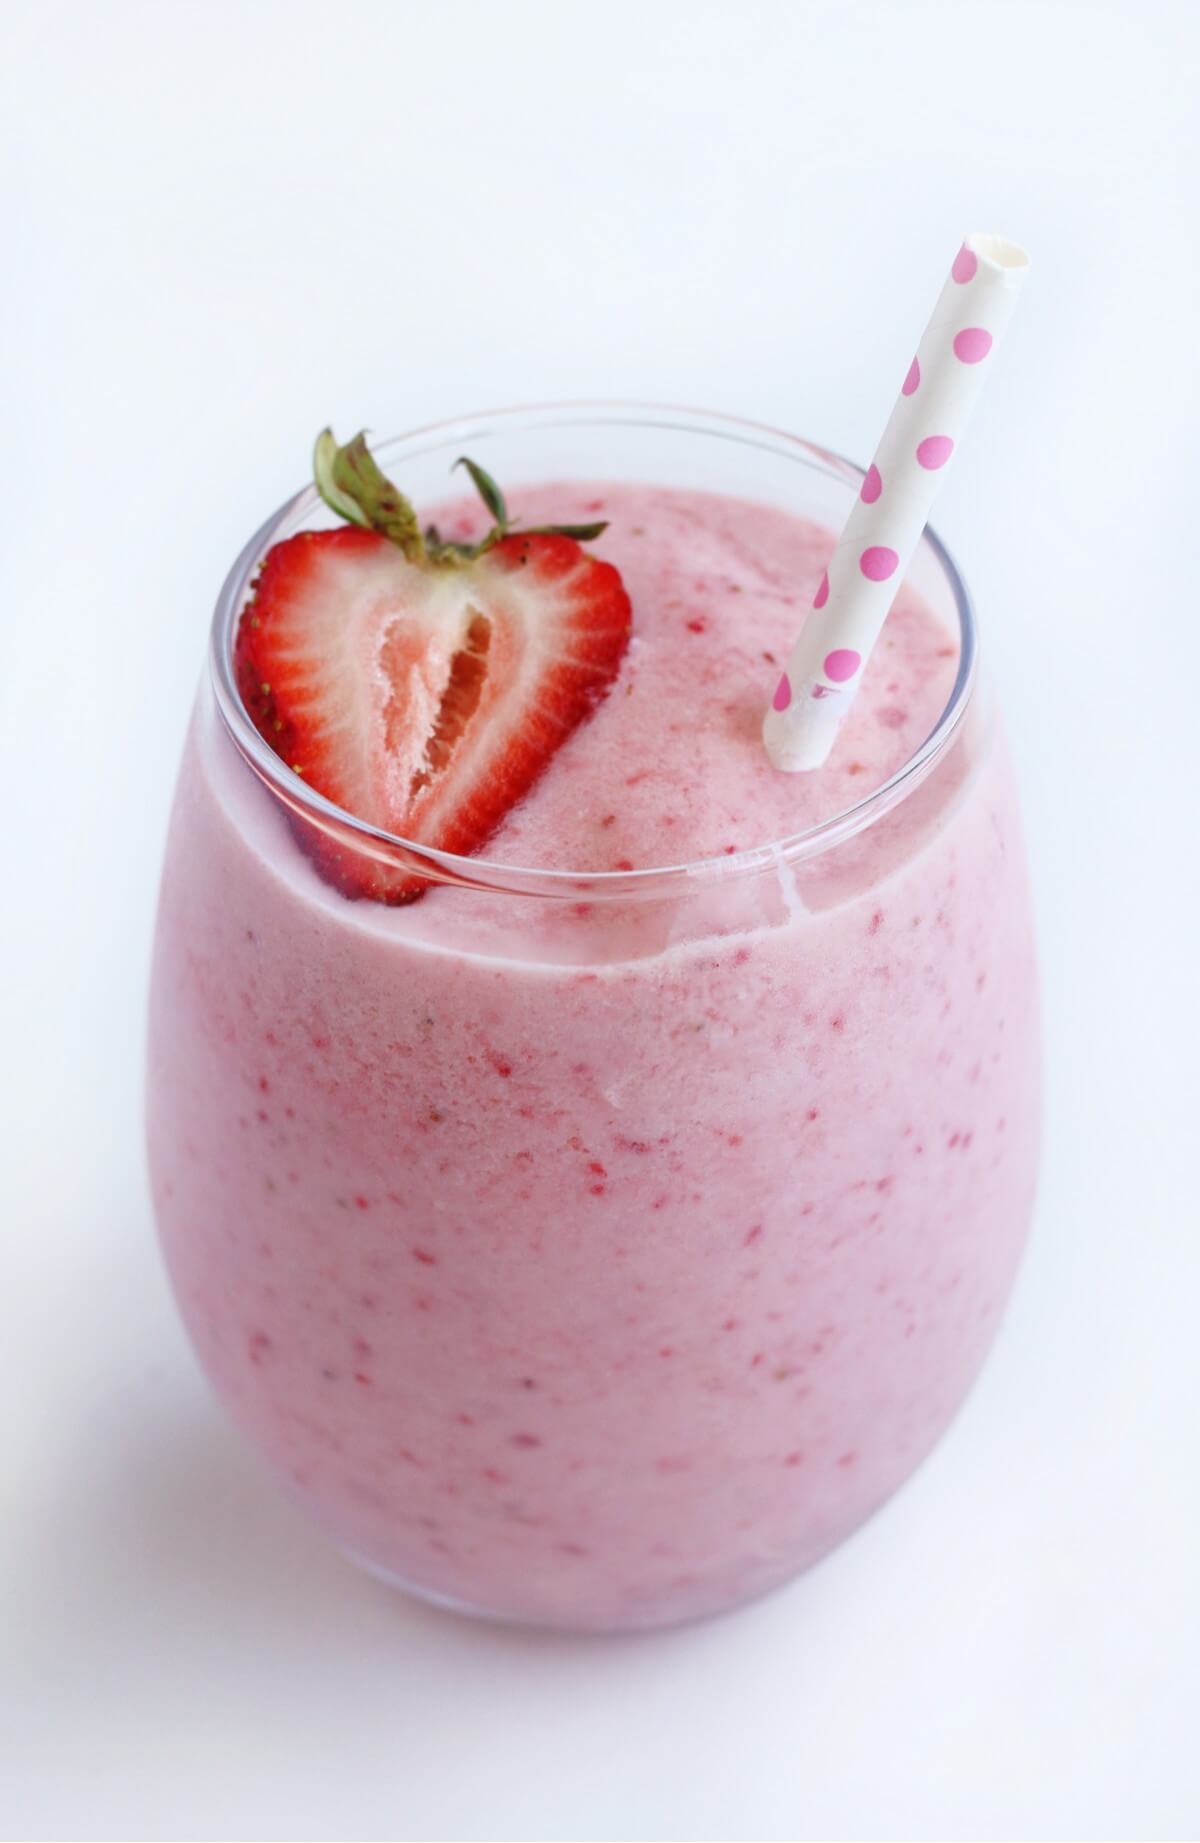 single glass of strawberry pina colada with strawberry and straw